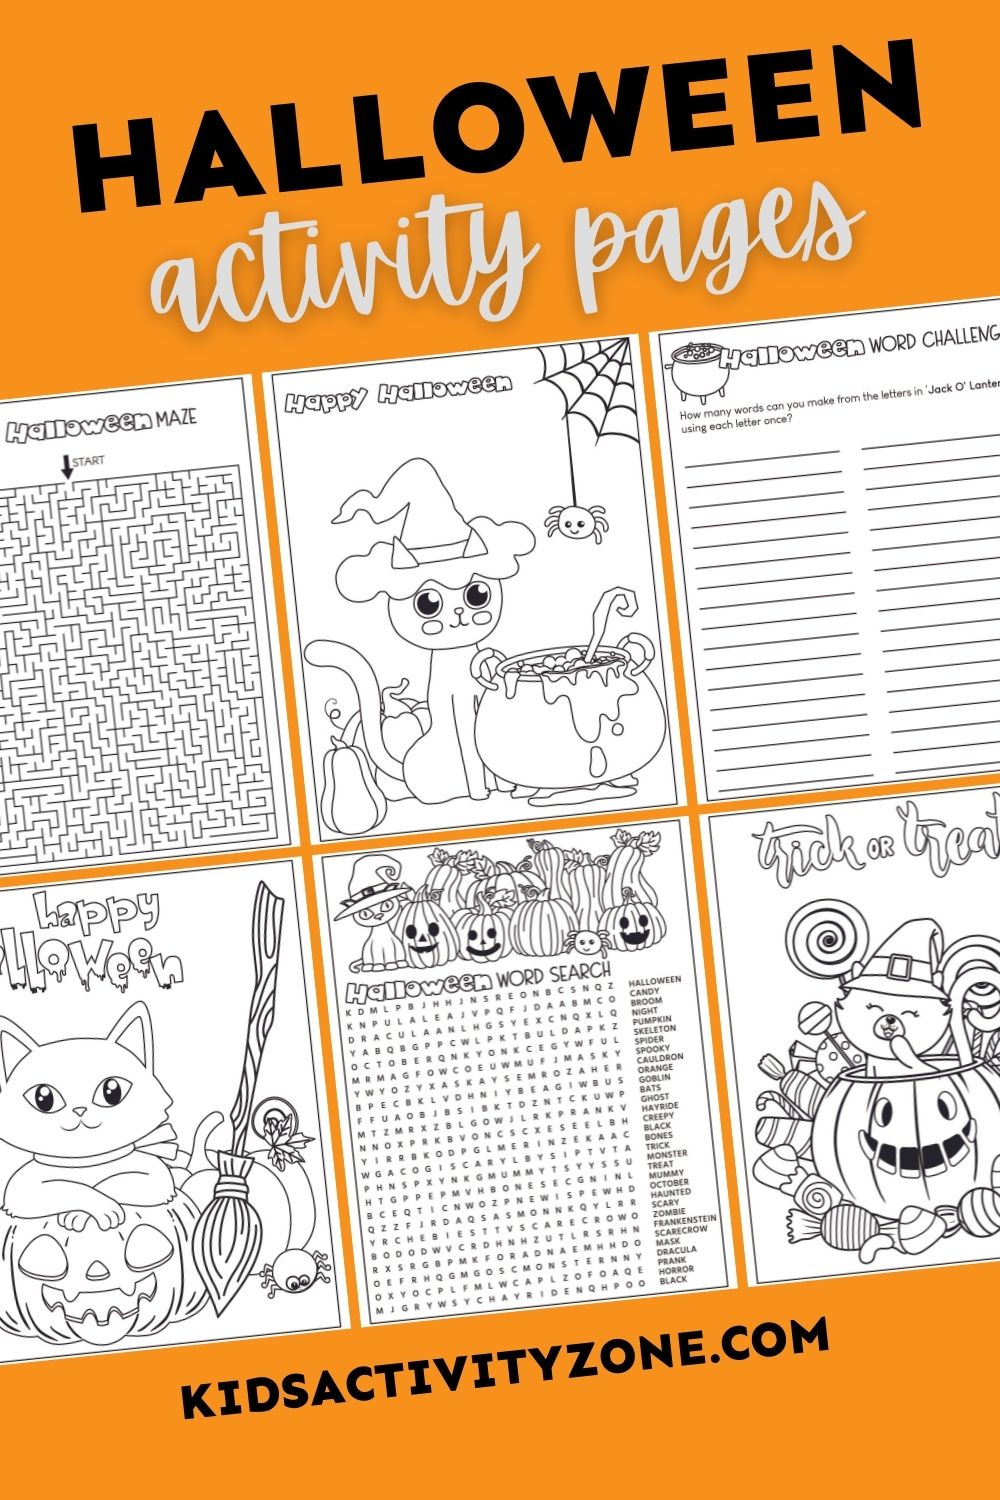 Fun, printable activities to celebrate Halloween! These free Halloween Activity Pages are so much fun for kids. Use them at parties, in the classroom or as boredom busters at home. Free printable includes a Halloween Word Search, Word Scramble, Word Challenge, Maze and Coloring Pages!